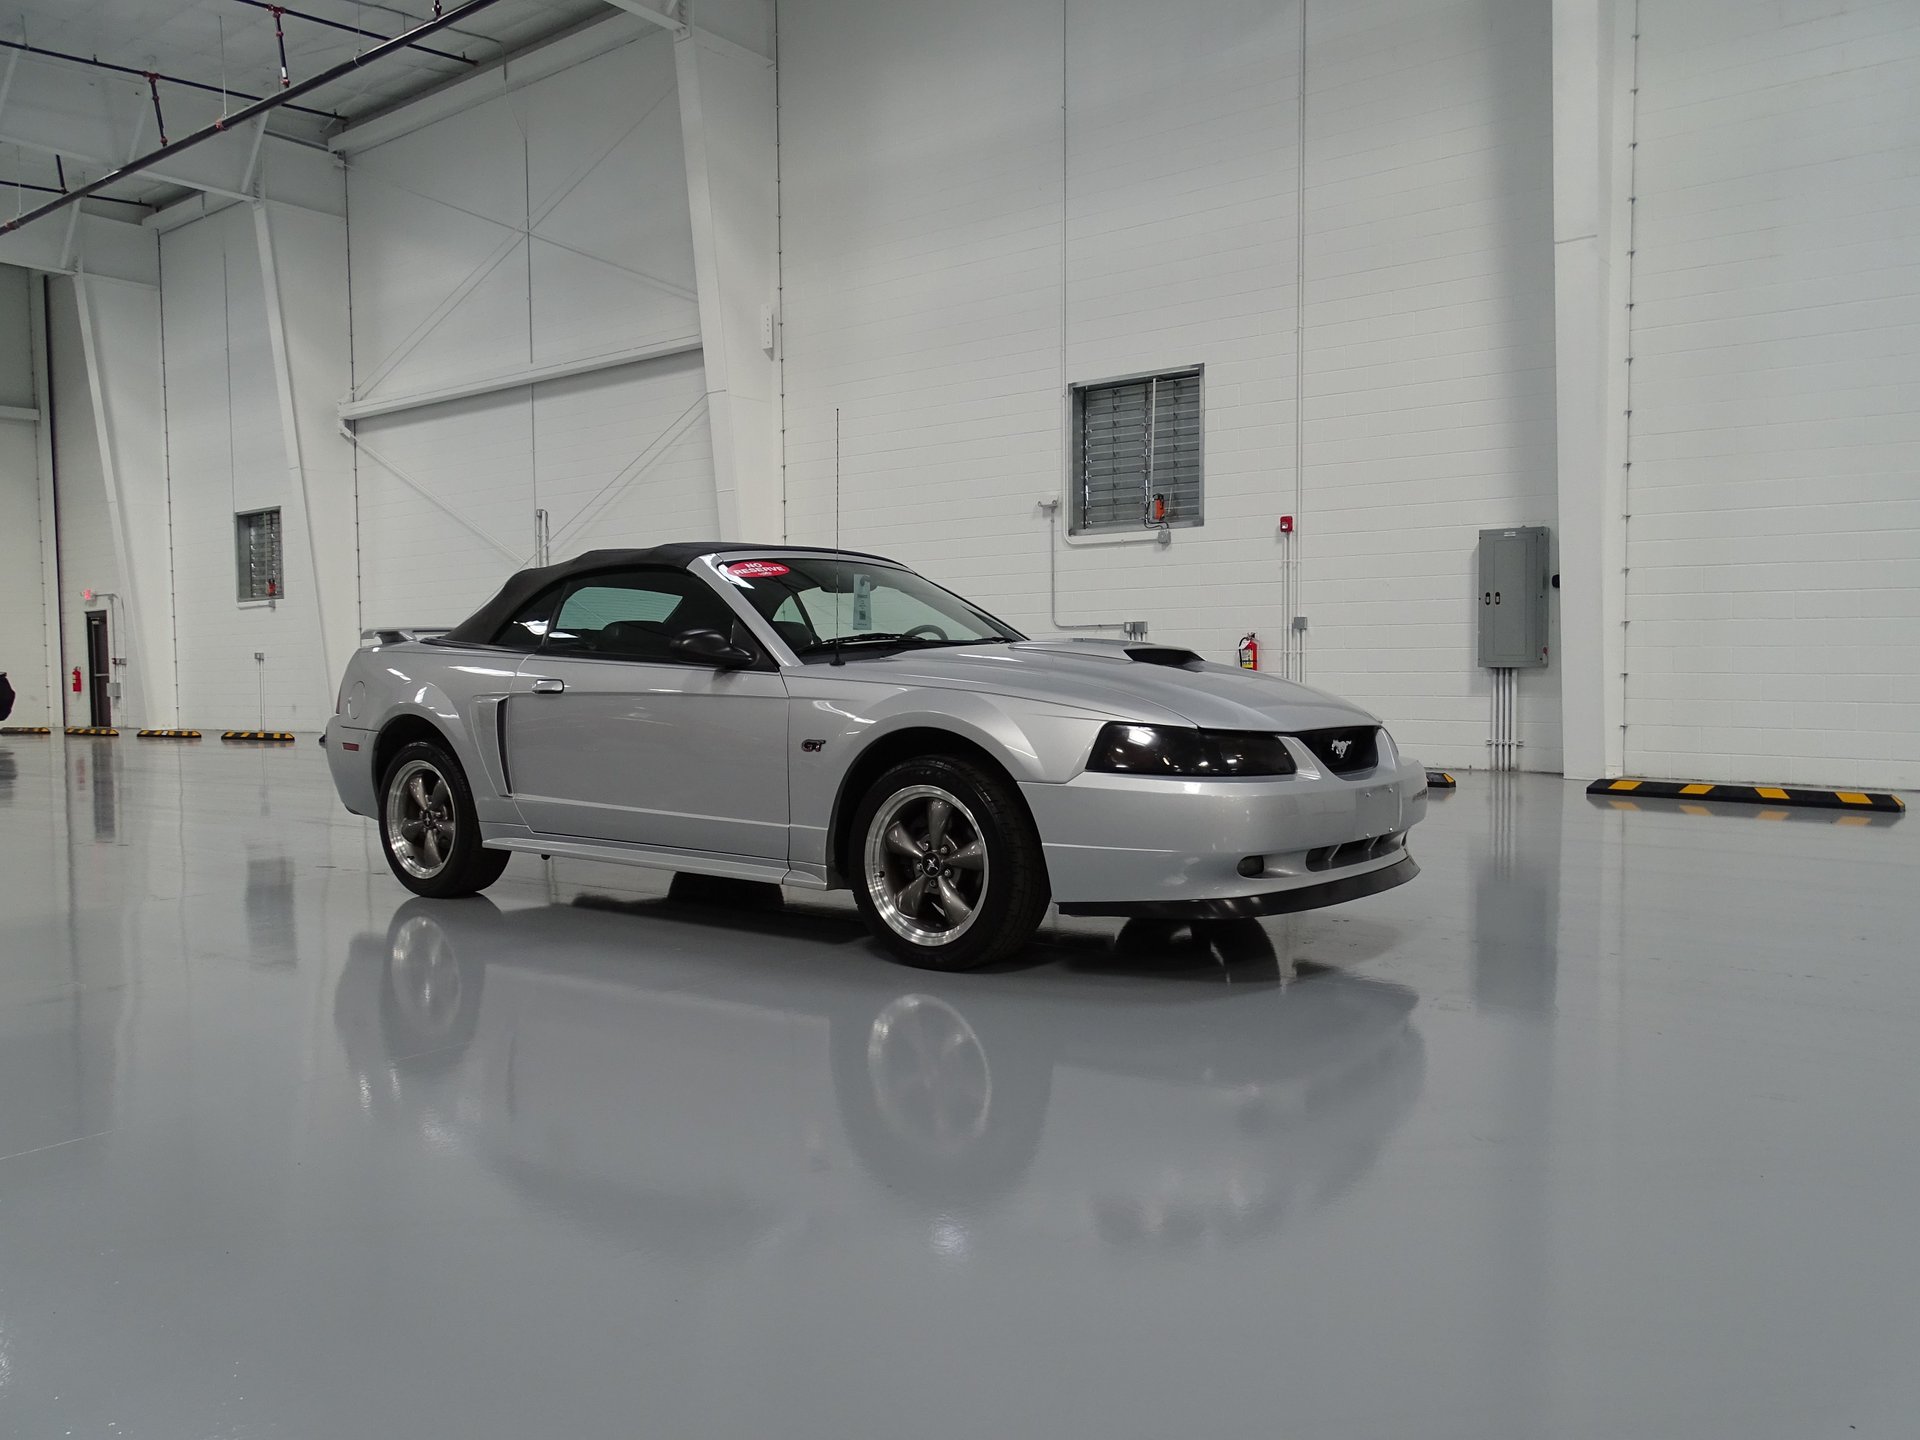 2003 ford mustang gt